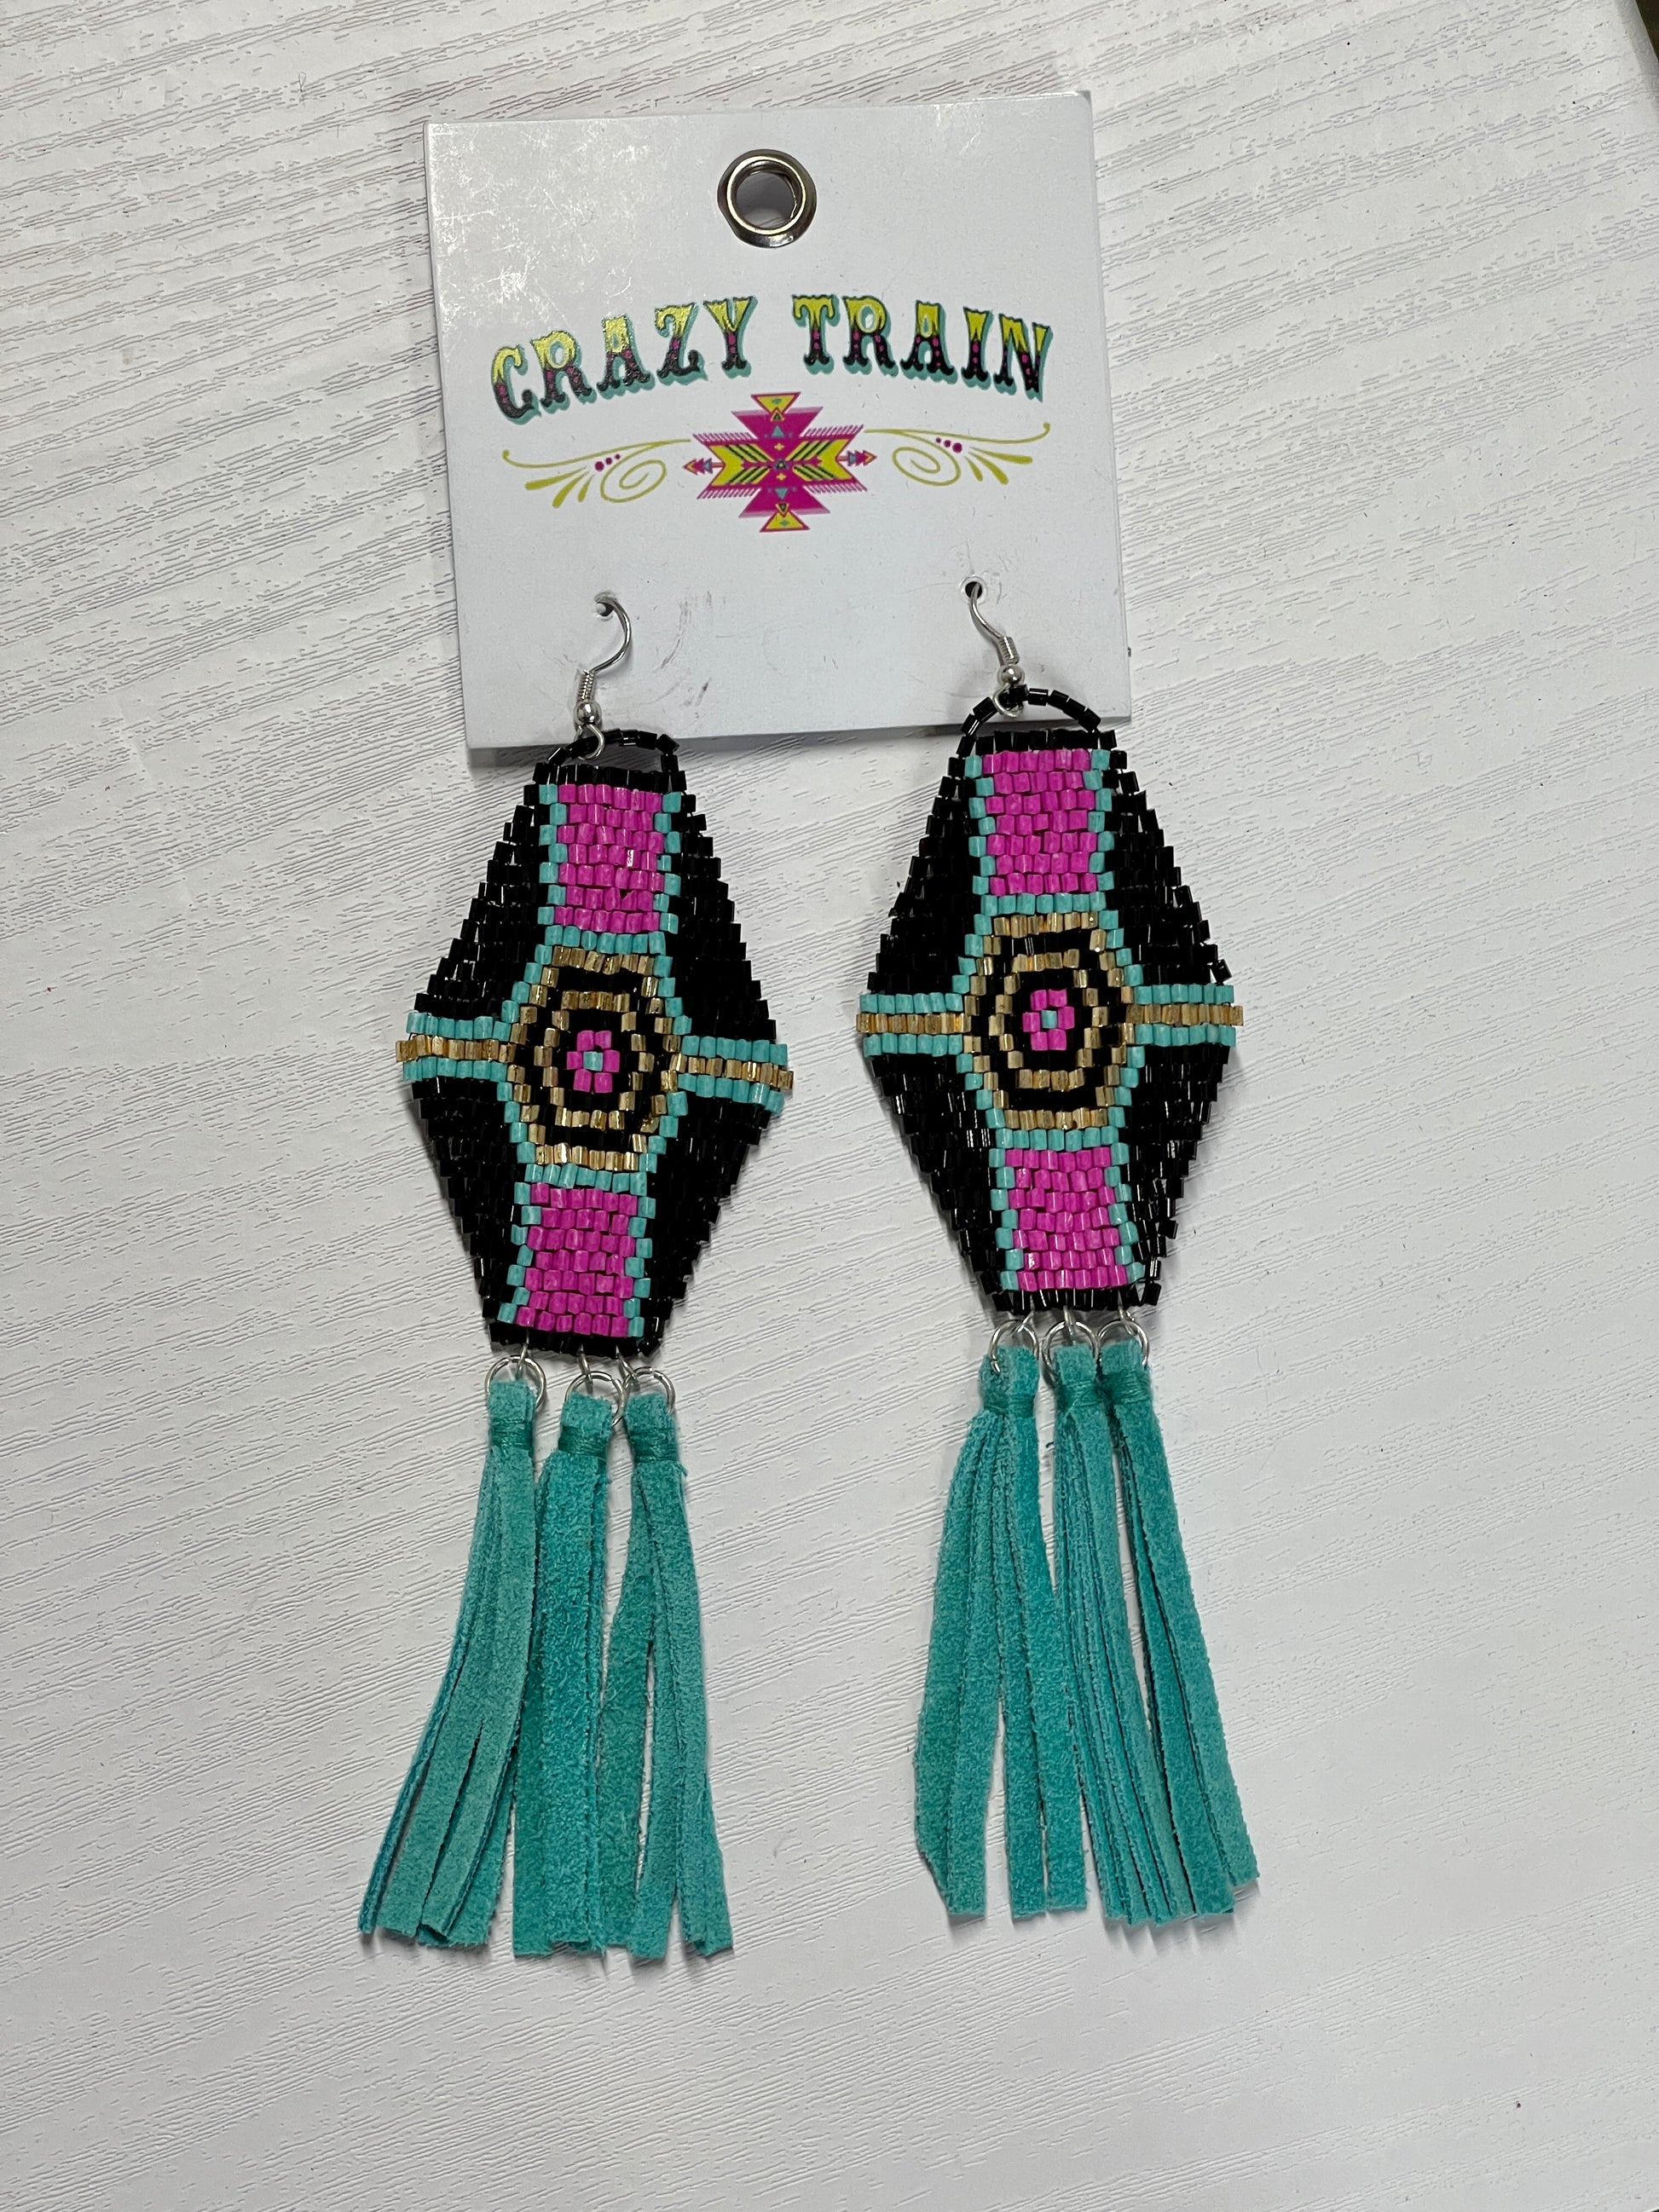 Crazy Train brand earrings.  Eloganted hexagon featuring a pattern with hot pink, teal black, and gold beads.  Adorned with 3 groups of teal leather tassels hanging from the bottom.